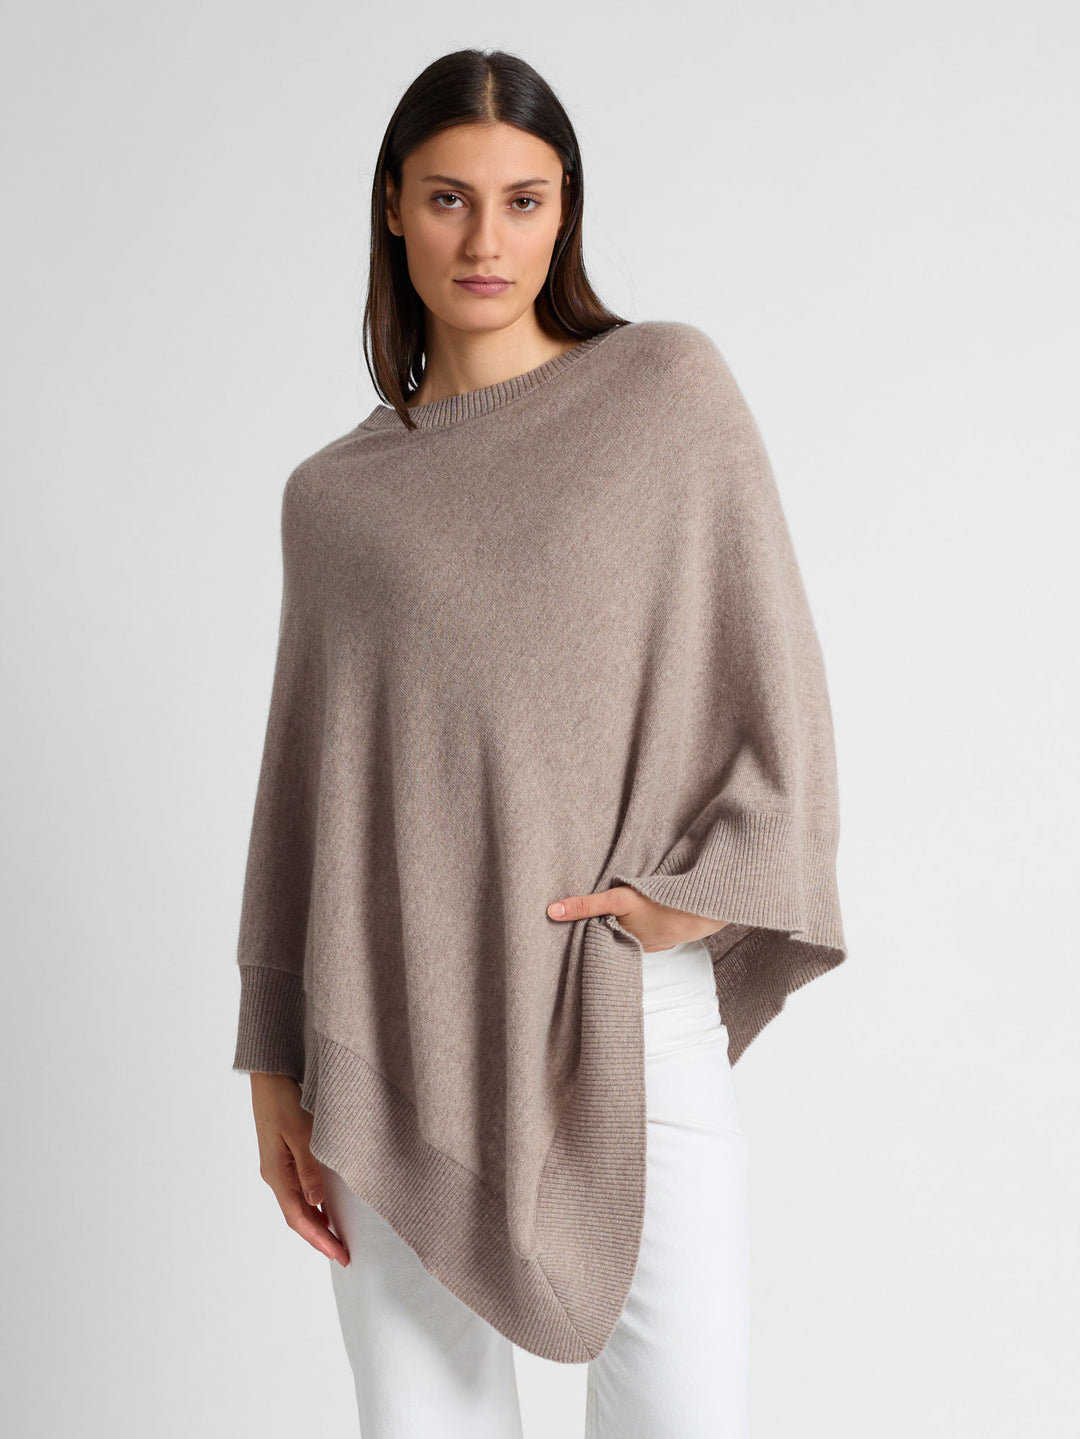 Cashmere poncho "Haddy" in 100% pure cashmere. Scandinavian design by Kashmina. Color: Toast.